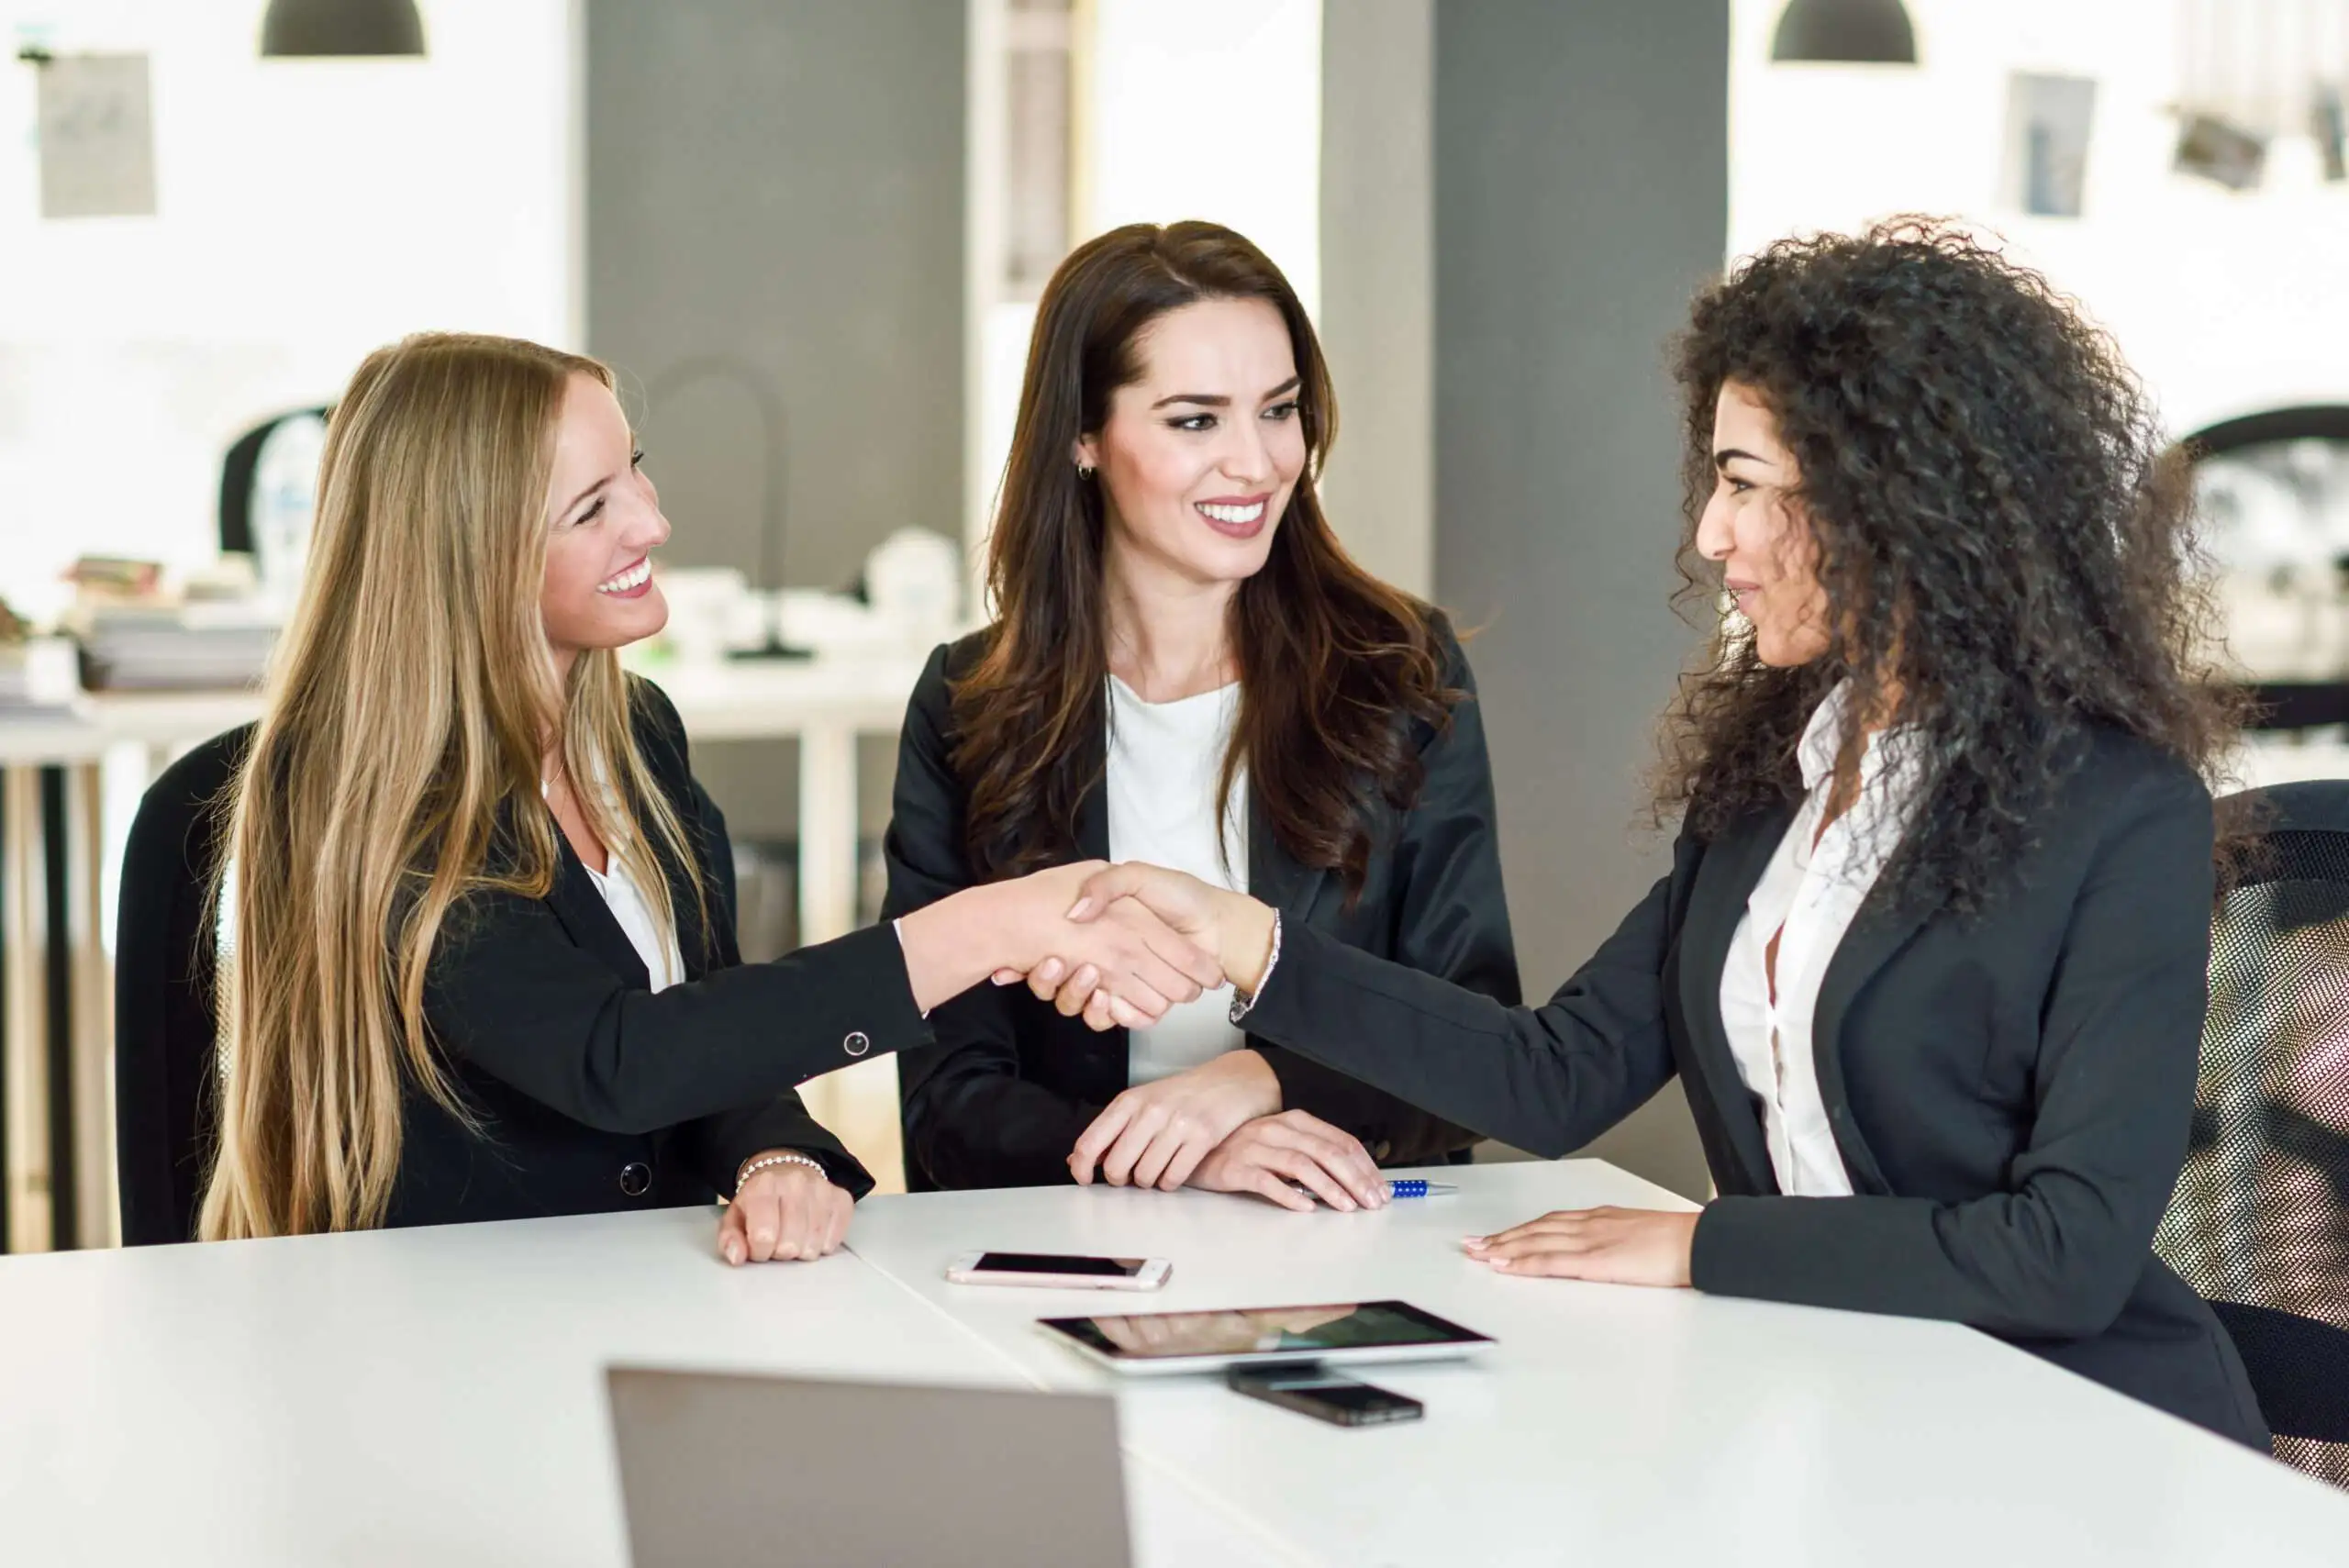 https://cloudaccountants.co/wp-content/uploads/2023/03/three-businesswomen-shaking-hands-modern-office-1-scaled-compressed.webp